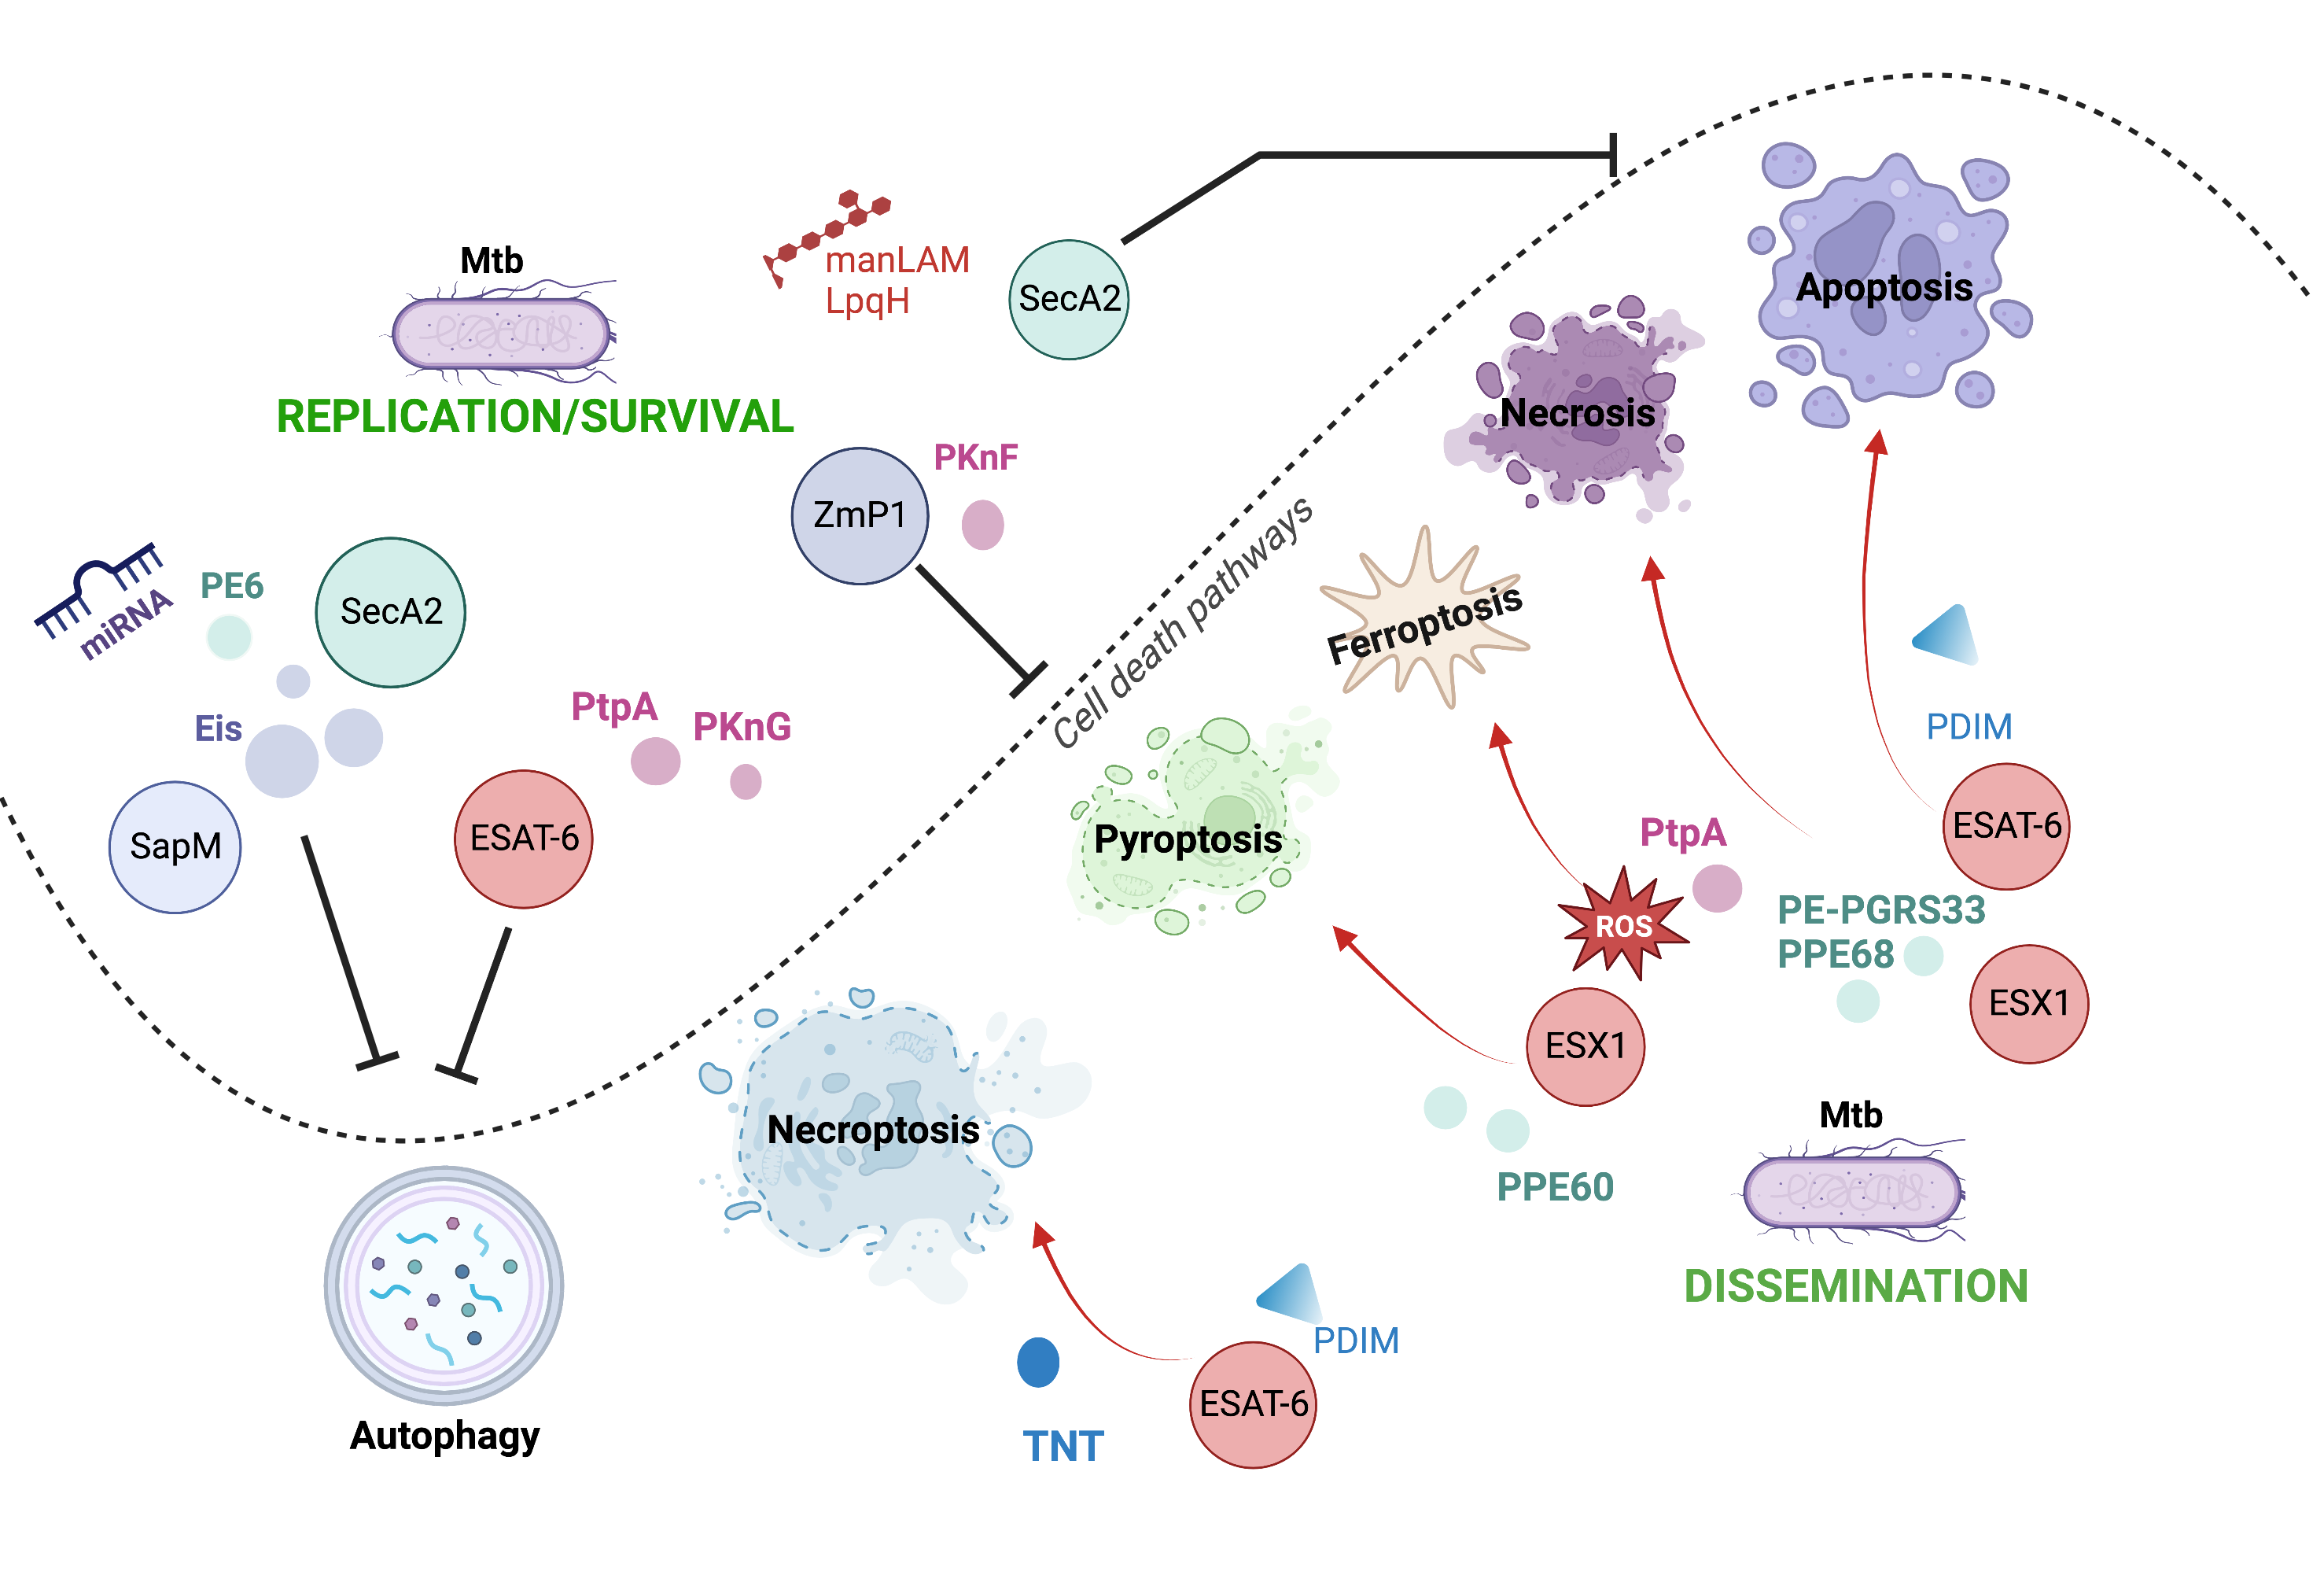 Cell death pathways modulated by Mtb through their virulence factors. Mtb can use its virulence factors as inductors (red arrows) or inhibitors (black inhibitors) of diverse cell death mechanisms to orchestrate the infection process.